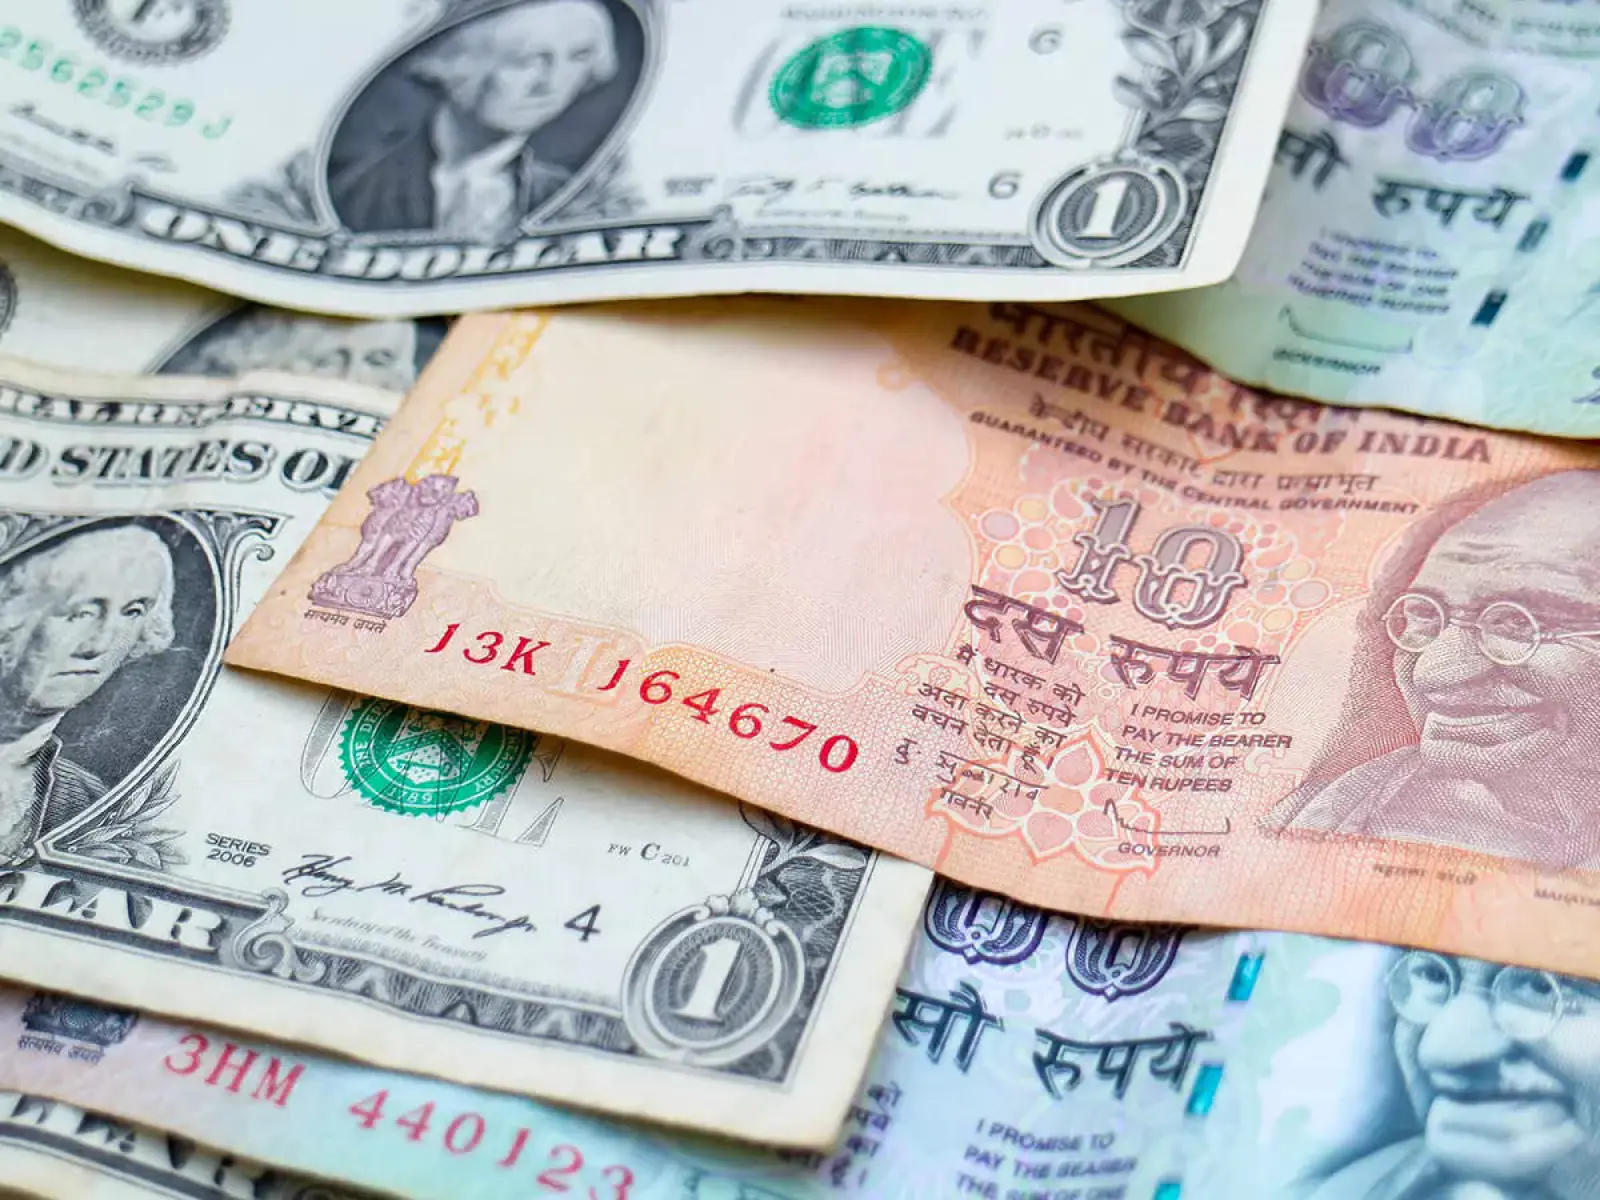 Dollar Vs Rupee: Indian currency saw a rise, Rupee increased by so much against dollar